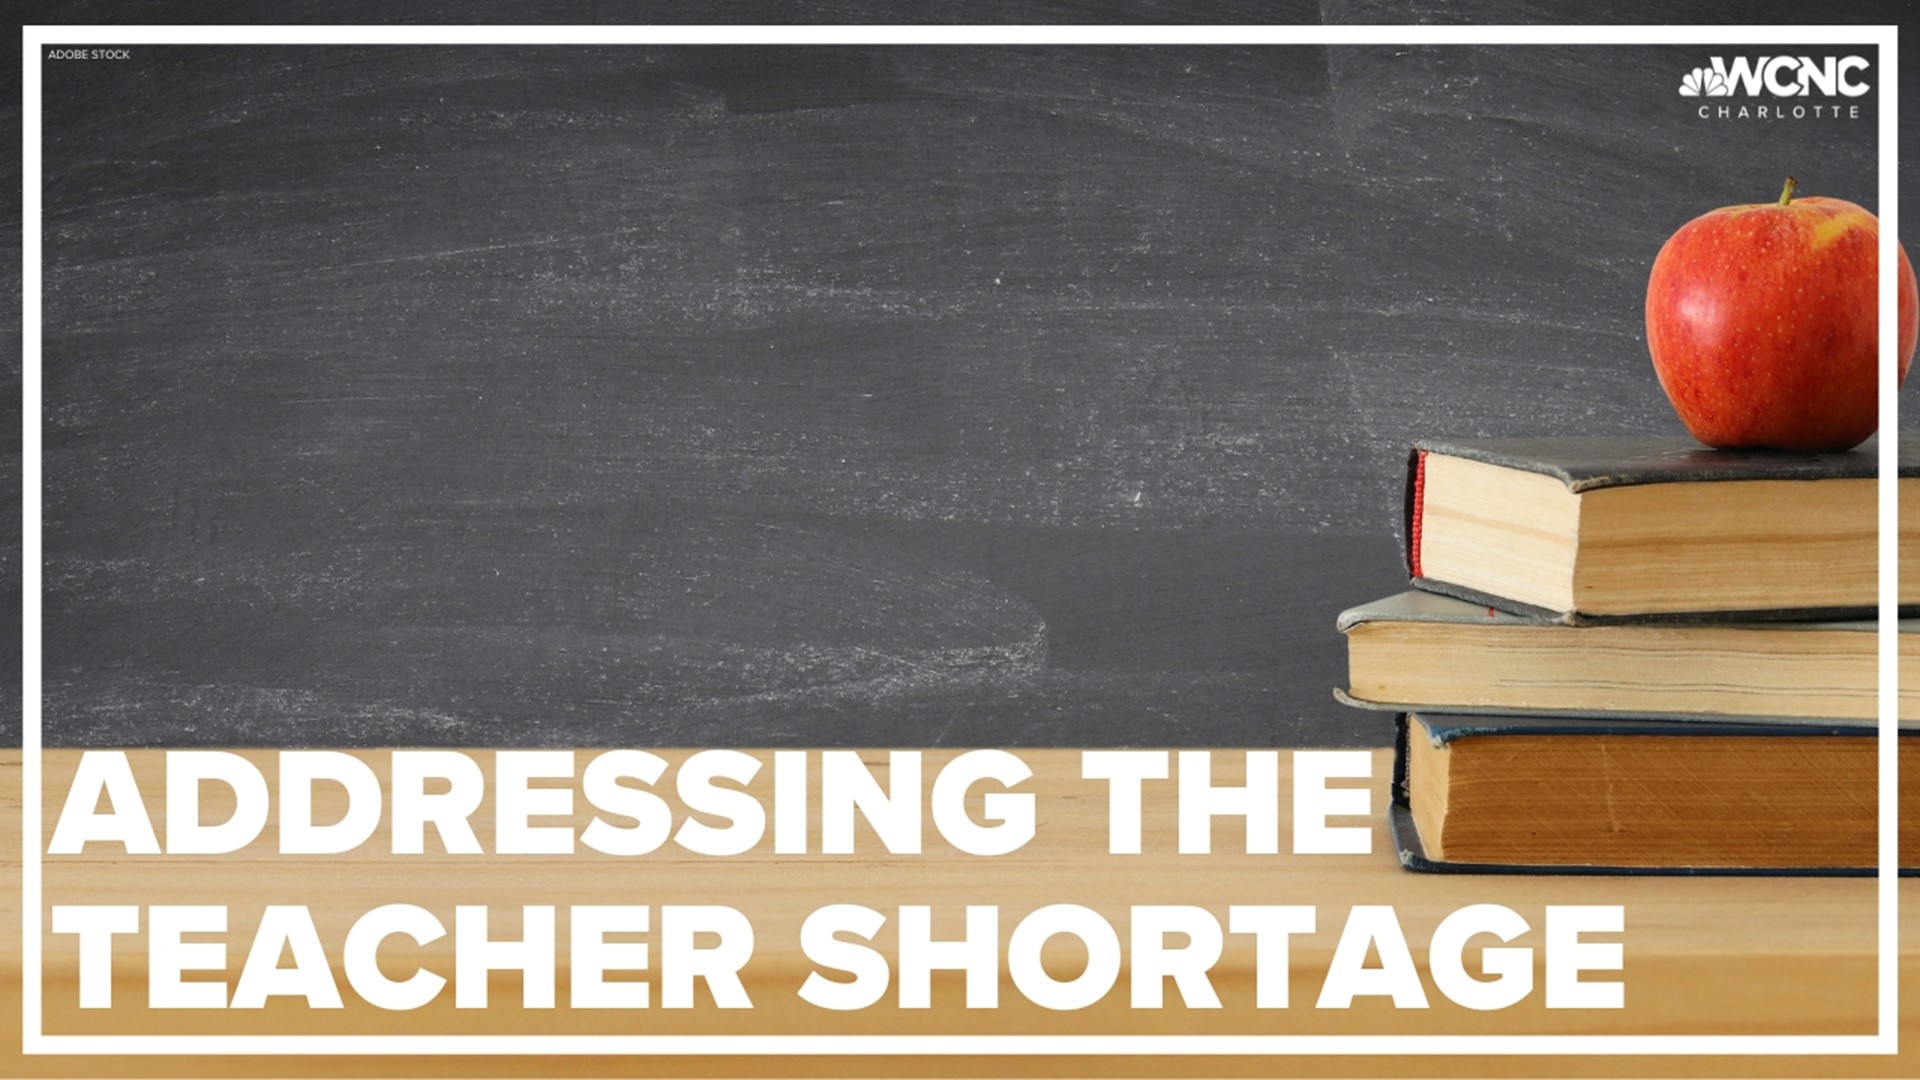 Schools across the Carolina's are dealing with a teacher shortage.